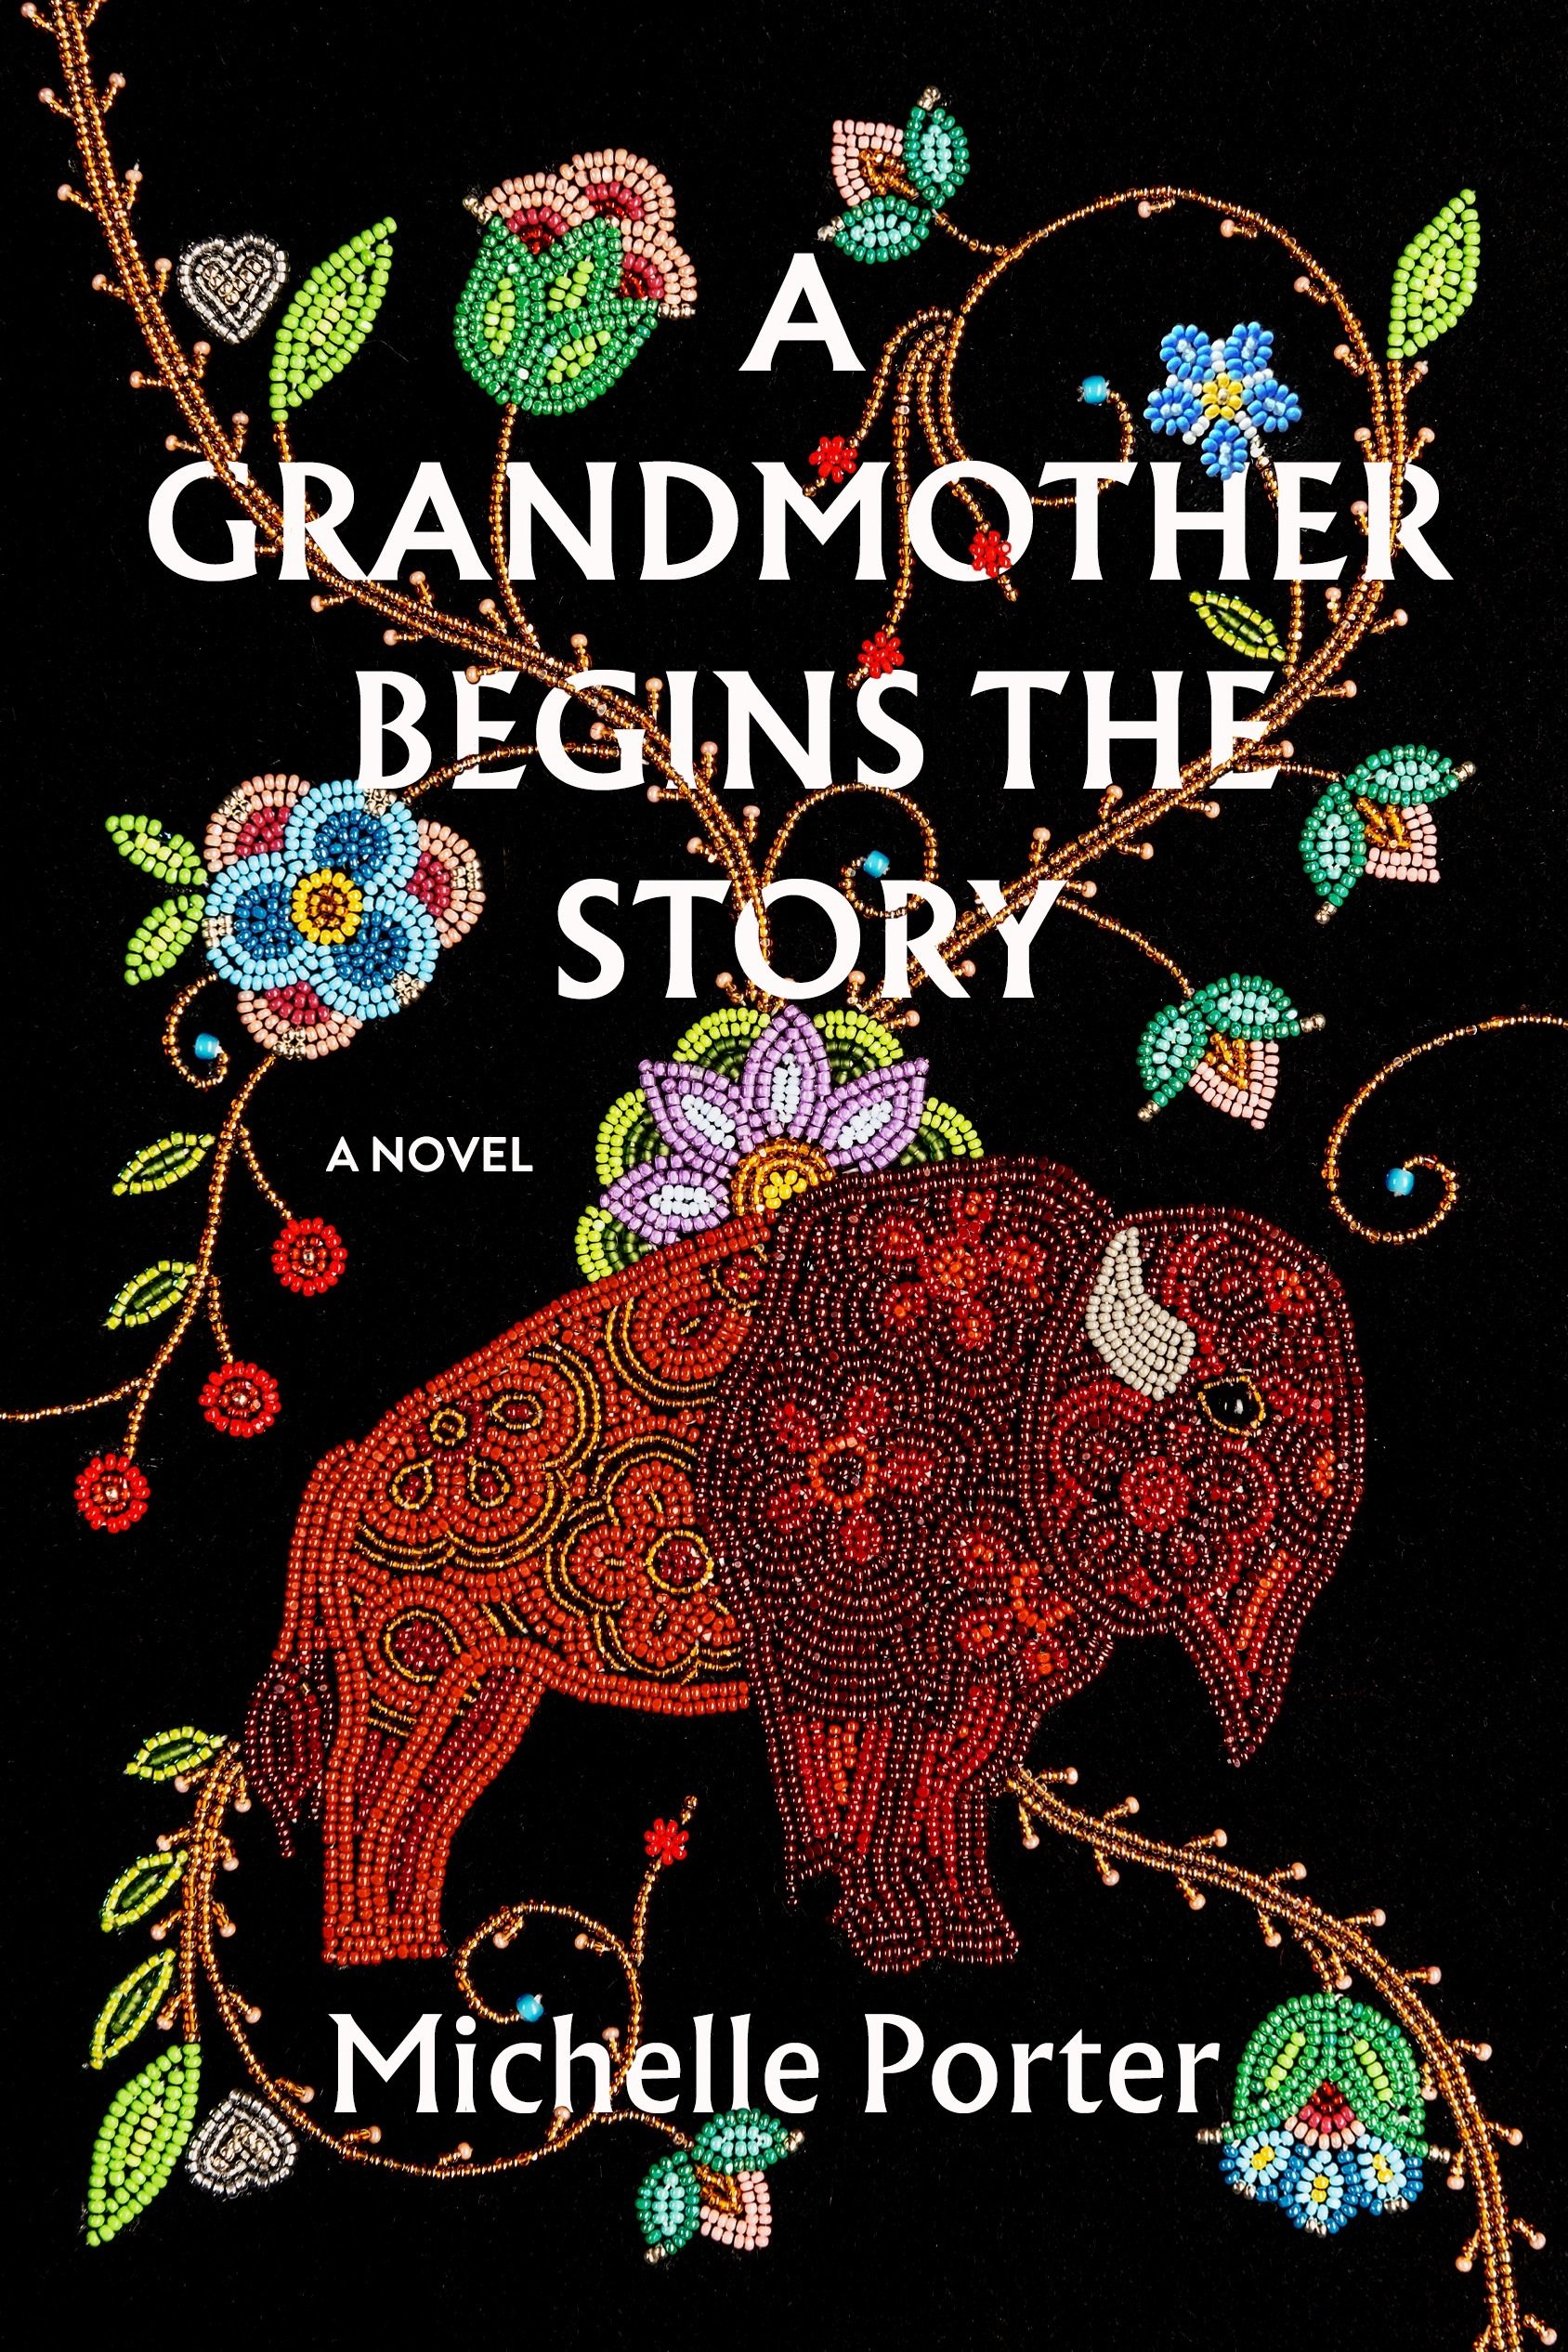 Porter, Michelle - A Grandmother Begins the Story - Cover FINAL.jpg